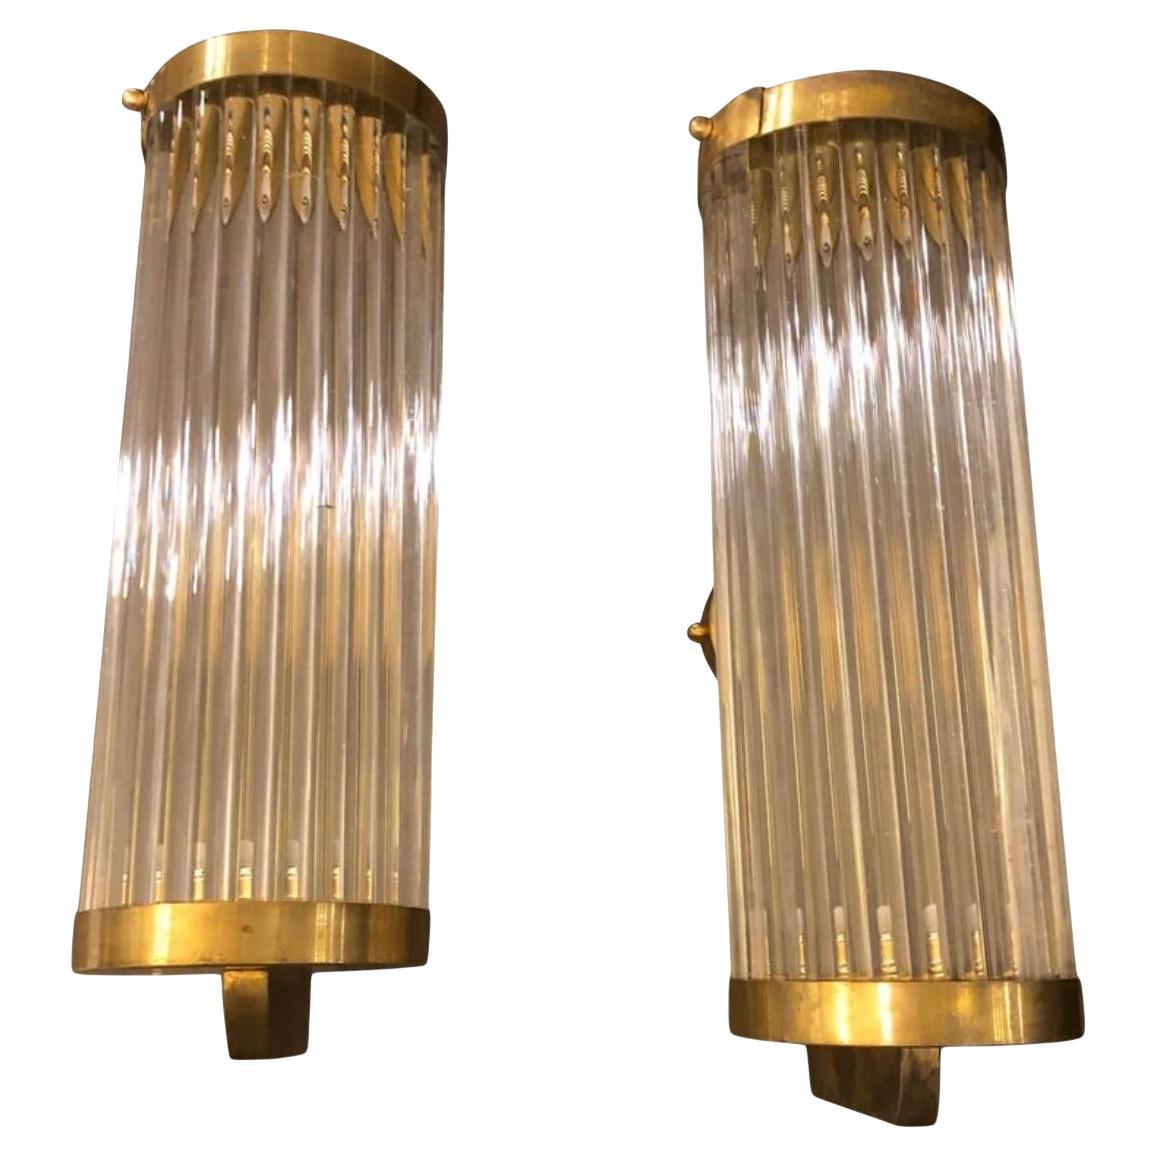 Stylish wall sconces made in Italy in the 1970s, solid glass tubes are in perfect conditions, brass it's in original patina. They have a system to be able to remove the glasses to clean them. Fully restored electrical parts, they work 110-240 volts